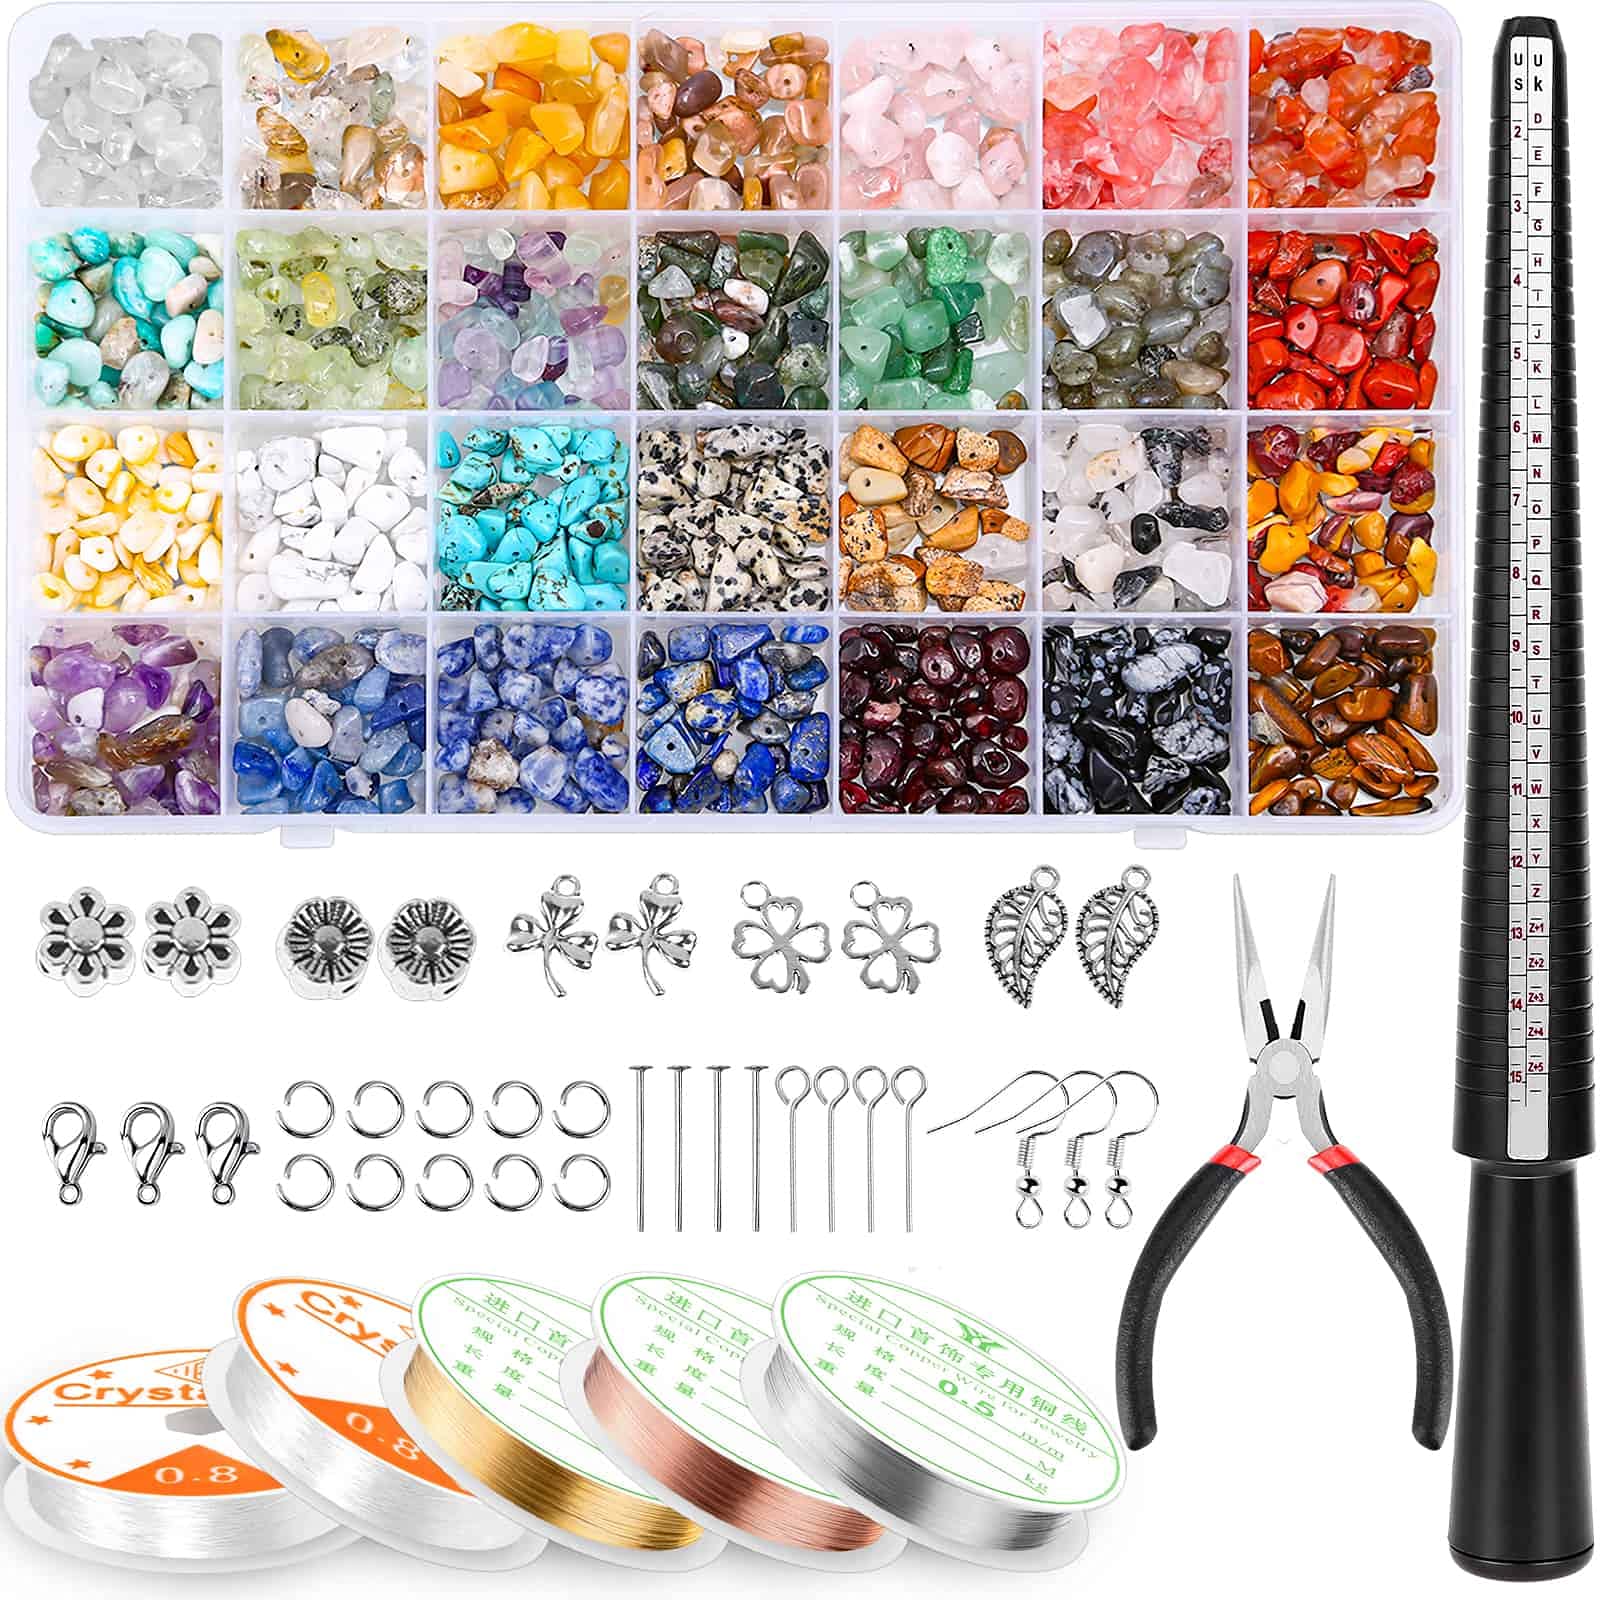 selizo Jewelry Making Kits for Adults Women with 28 Colors Crystal Beads  1660Pcs Crystal Bead Ring